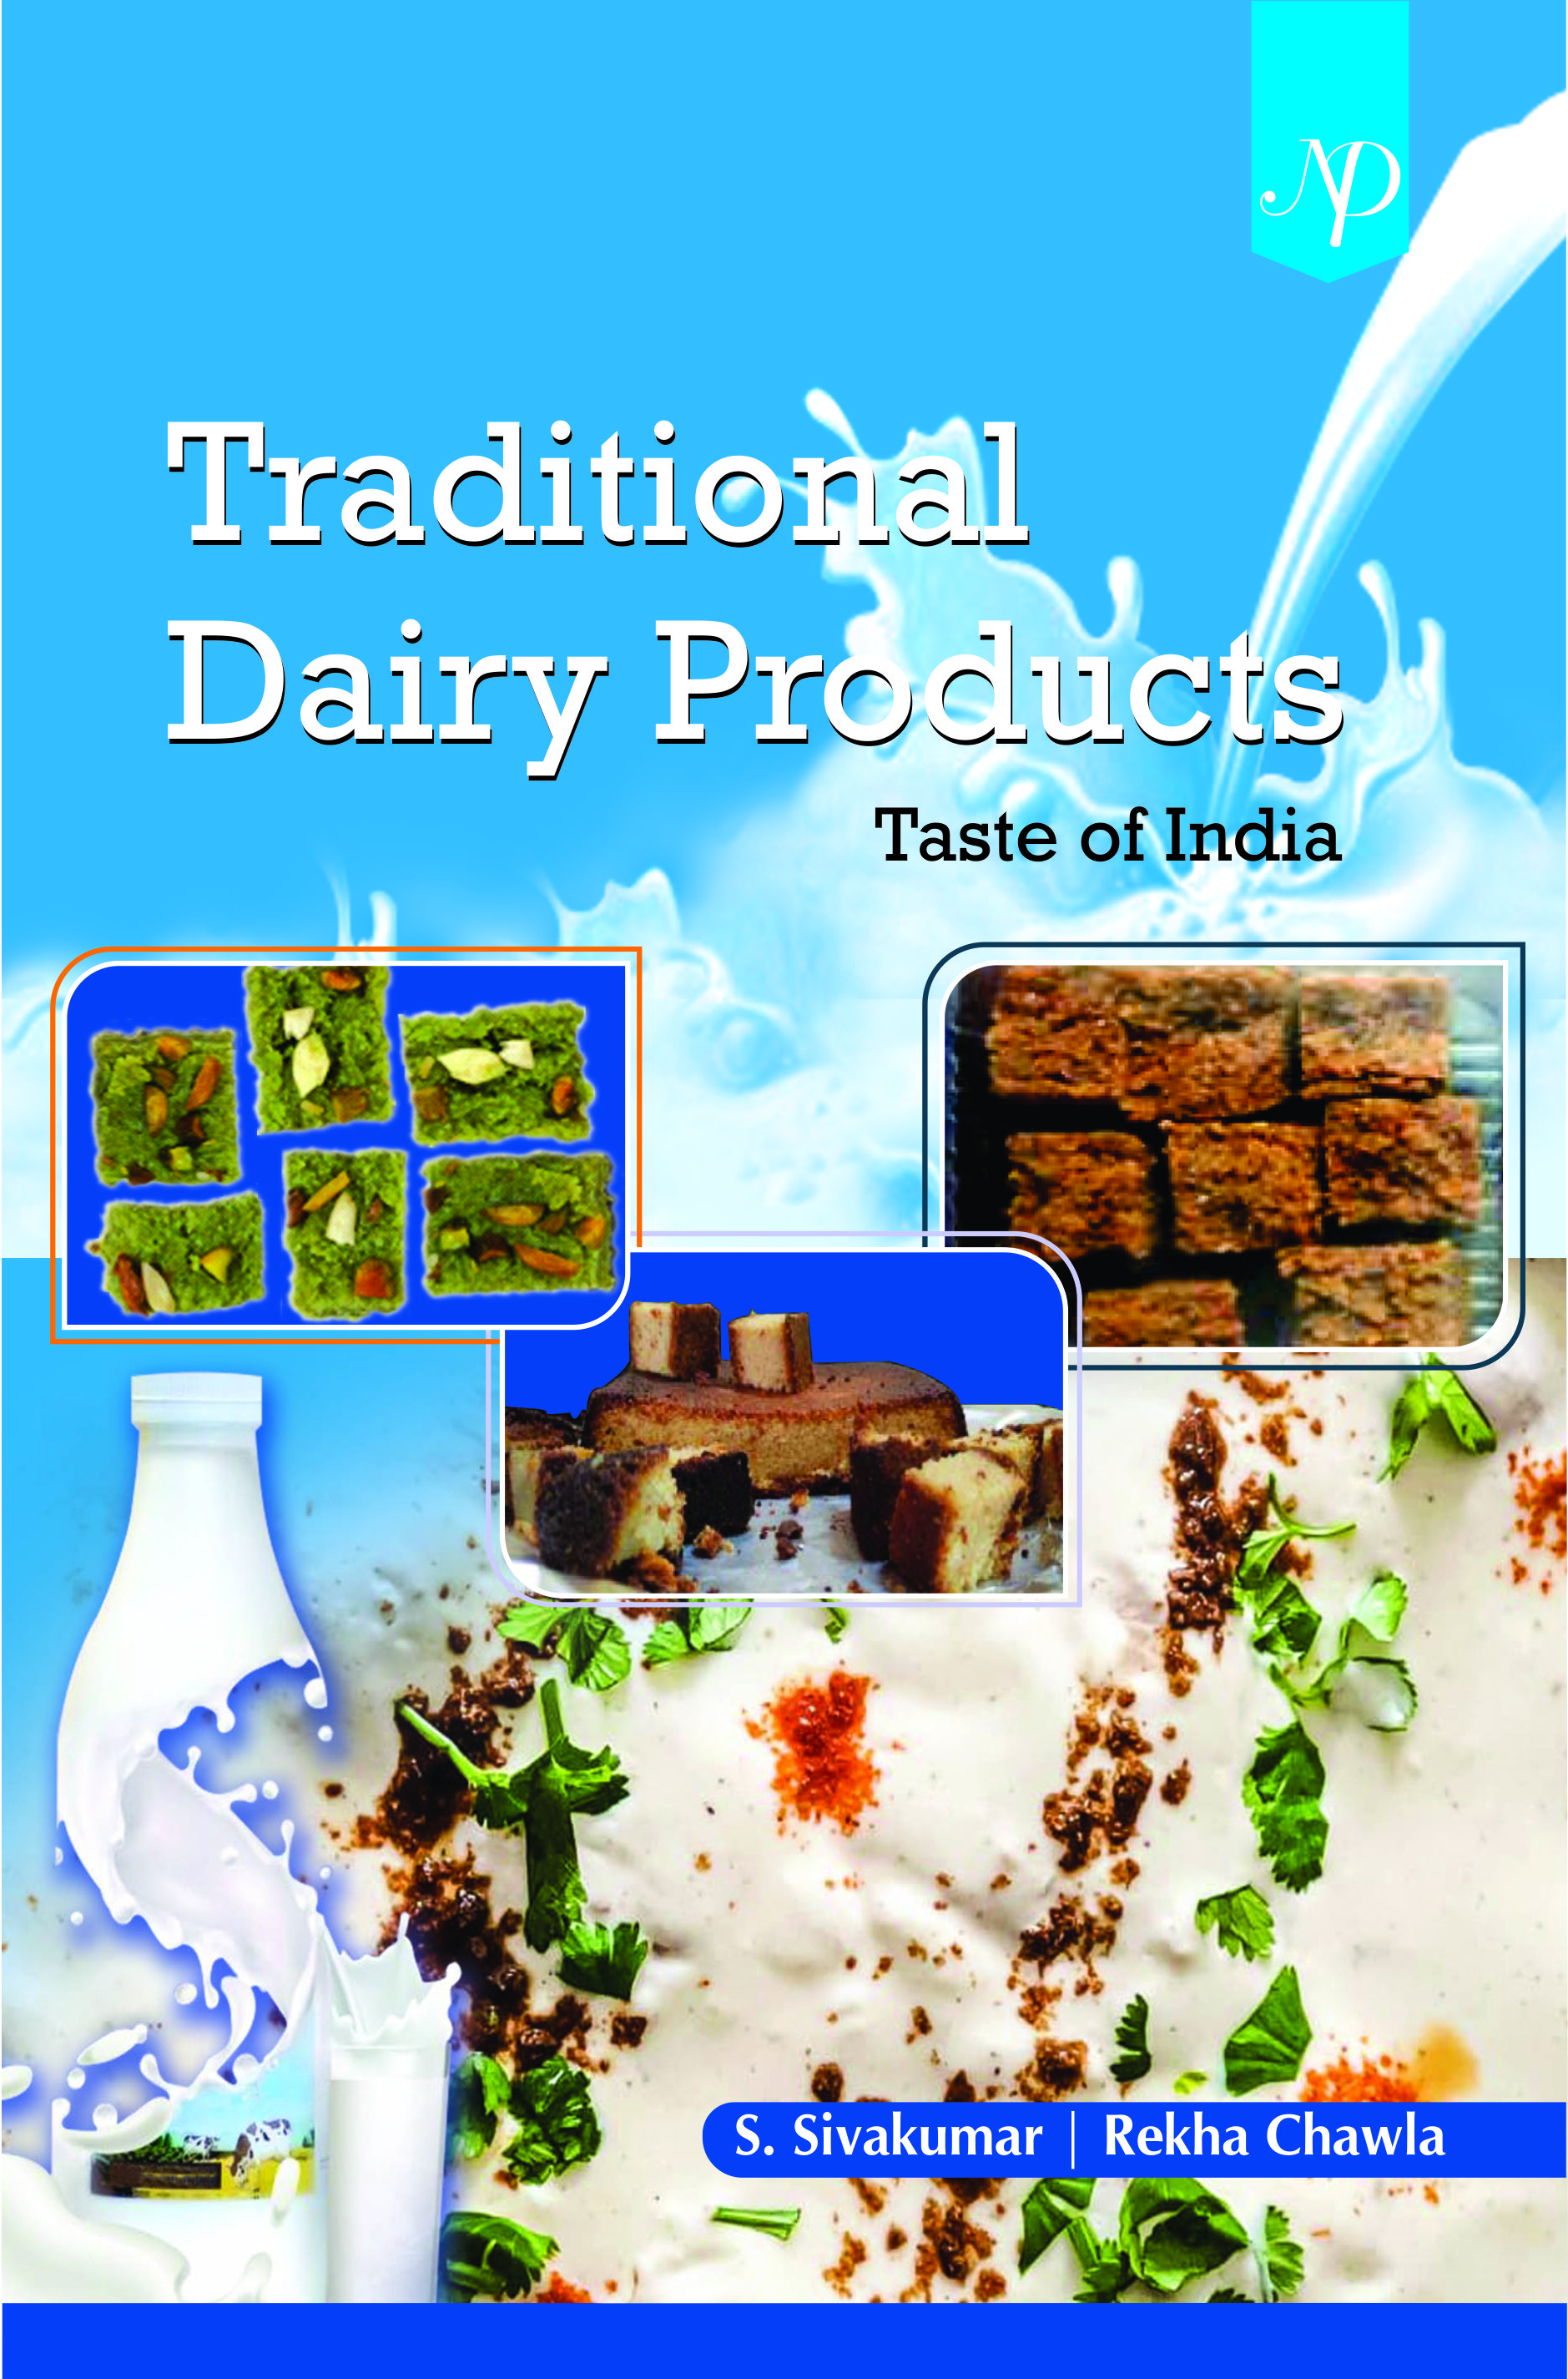 Traditional Dairy Products - Taste of India Cover.jpg